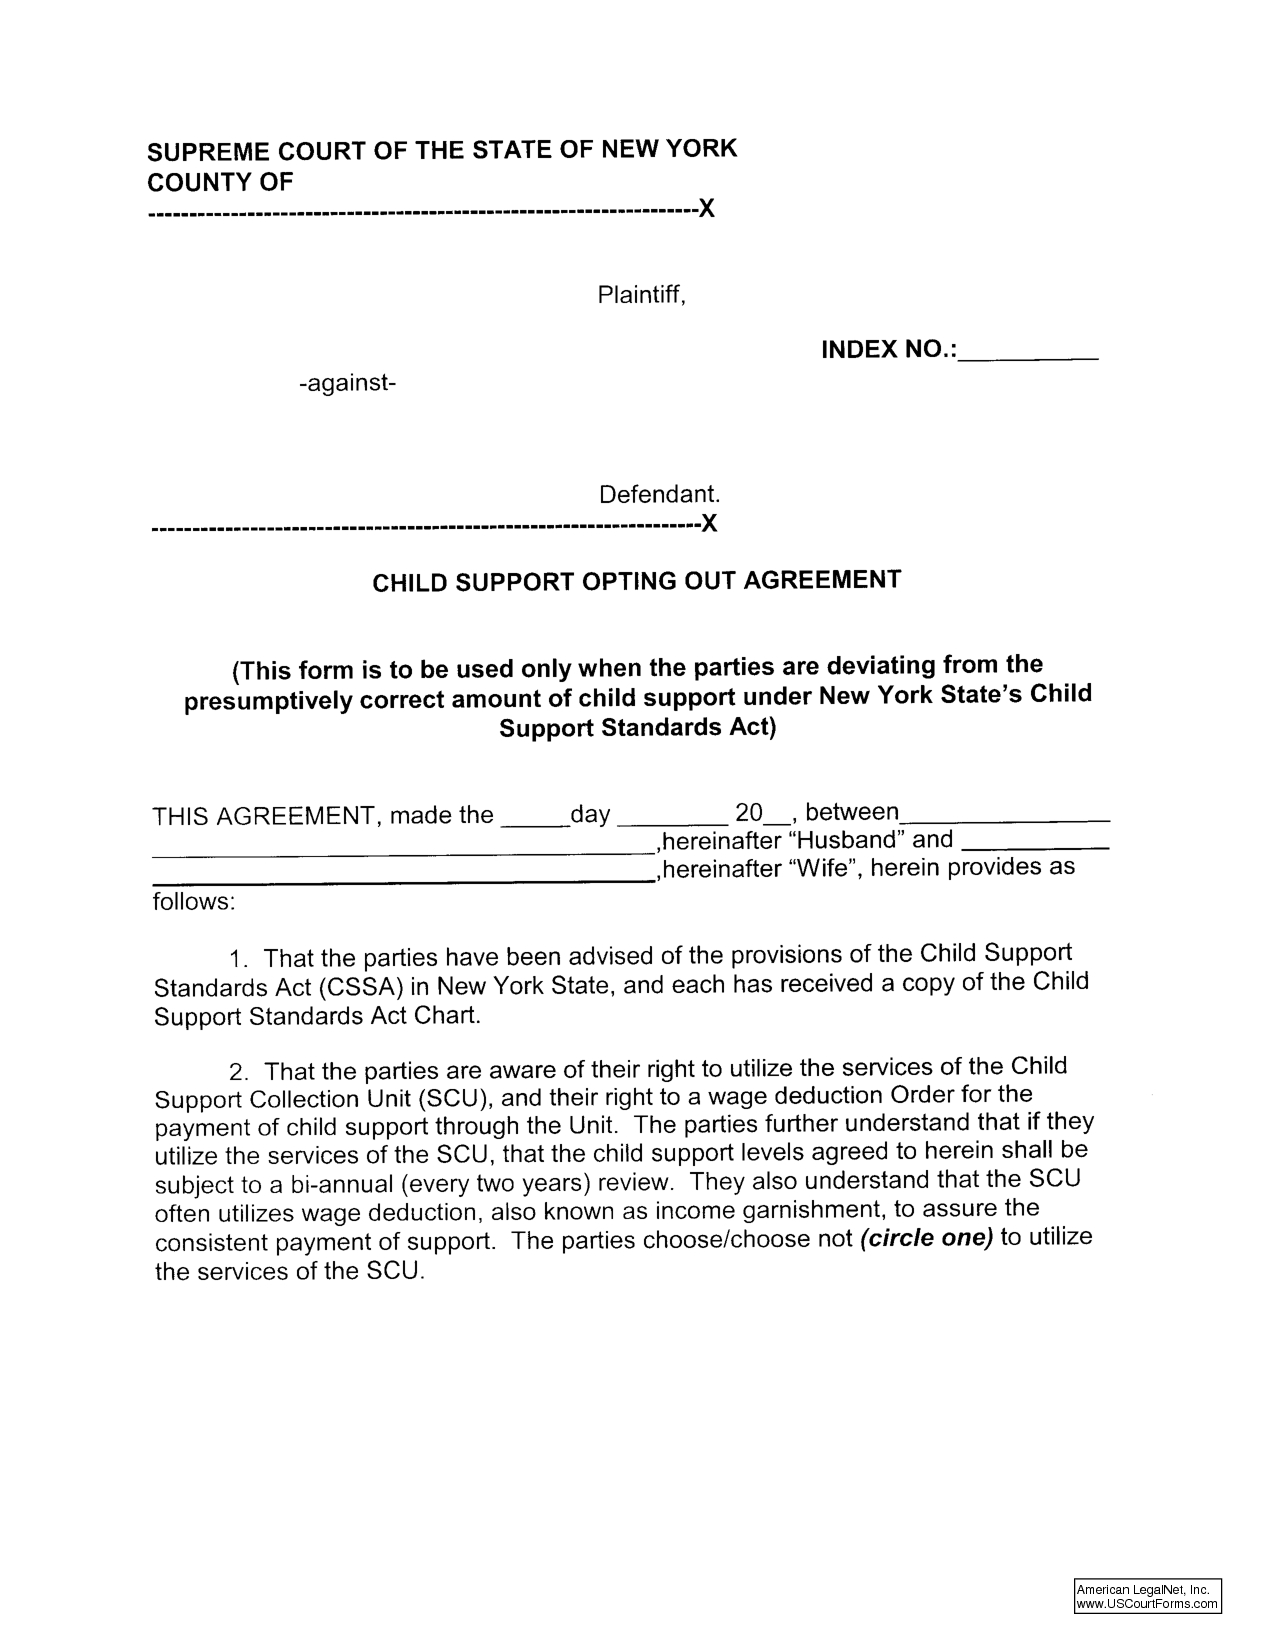 Child Support Letter Of Agreement Template - How to Write A Letter to Child Support Gallery Letter format